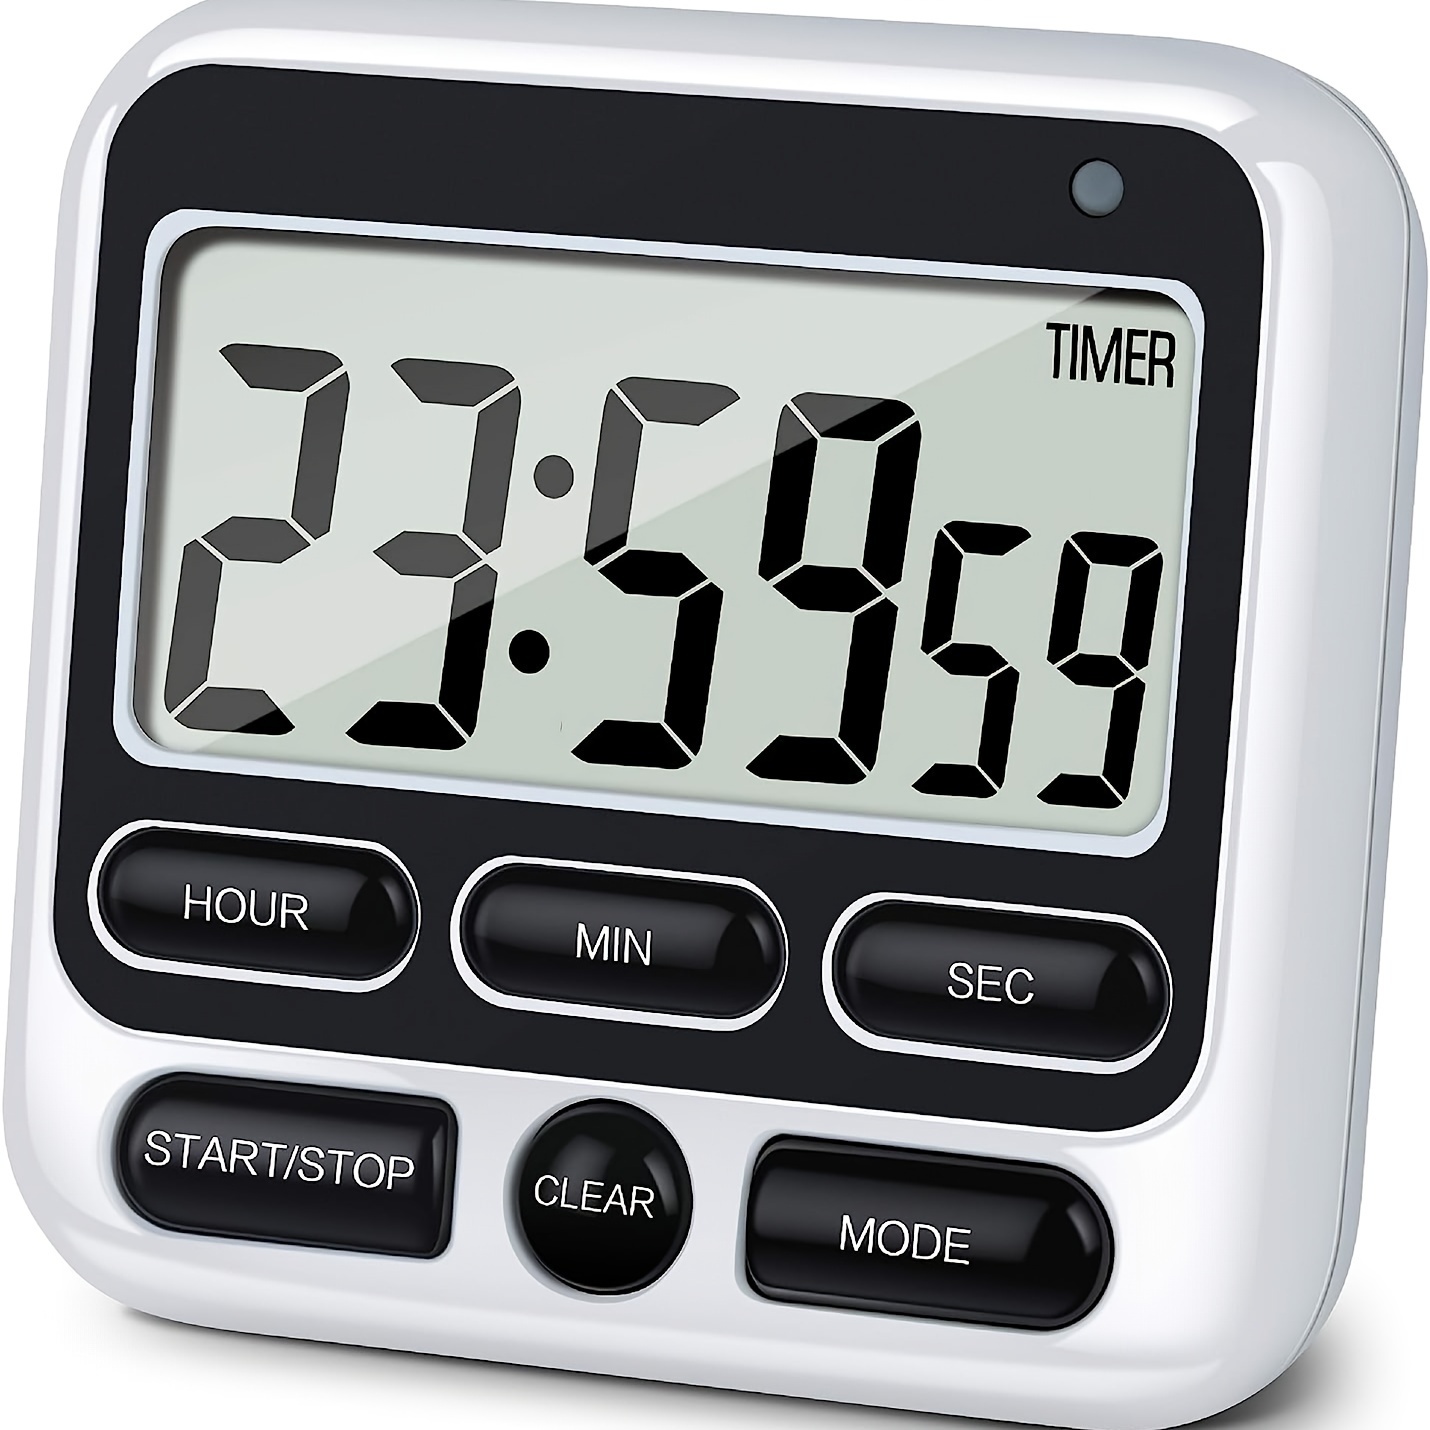 Large LCD Digital Kitchen Cooking Timer Count-Down Up Clock Loud